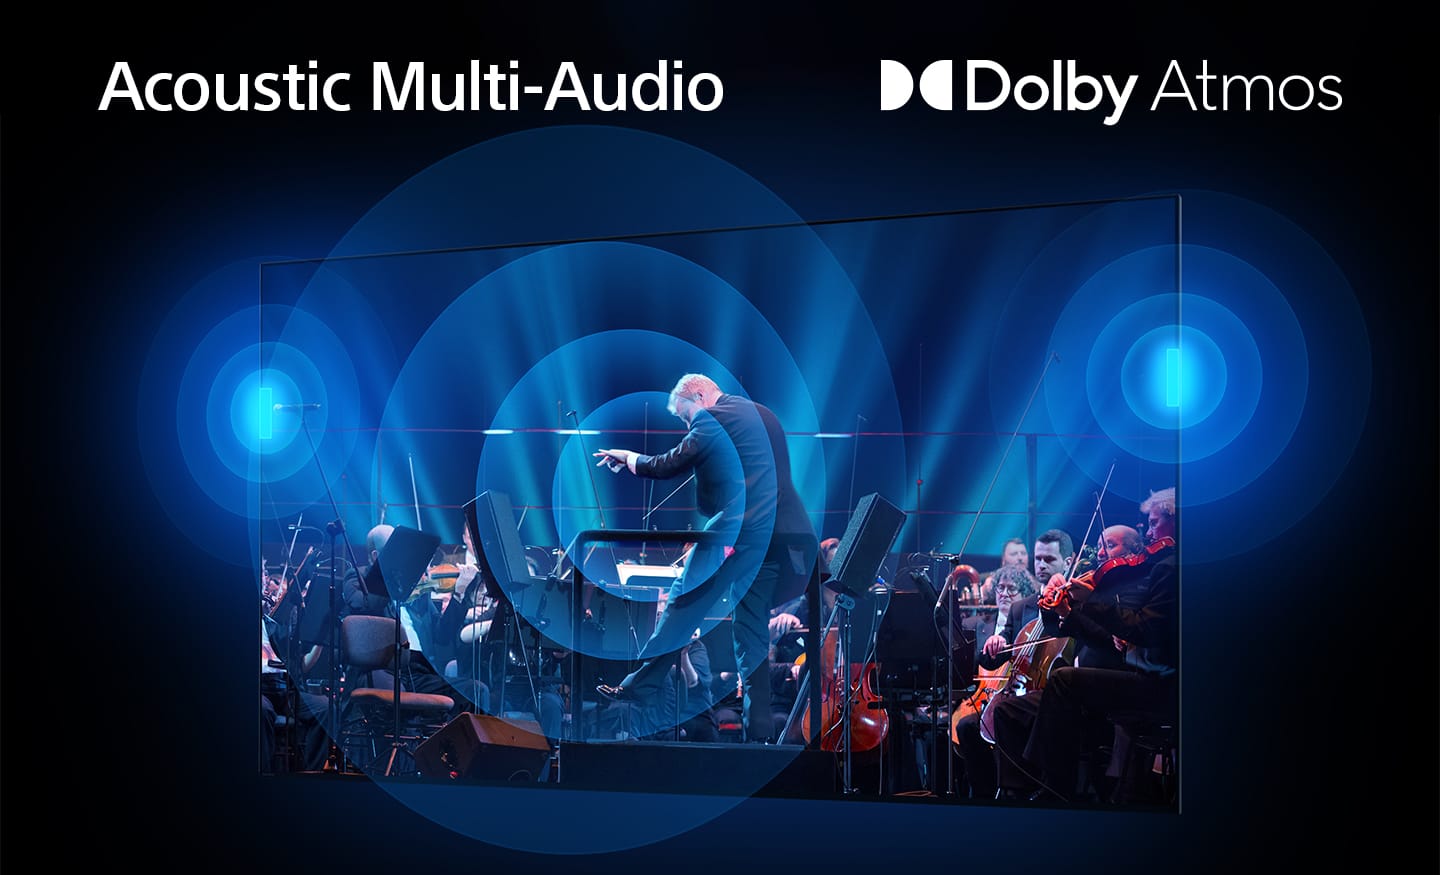 Acoustic Multi Audio and Spatial sound